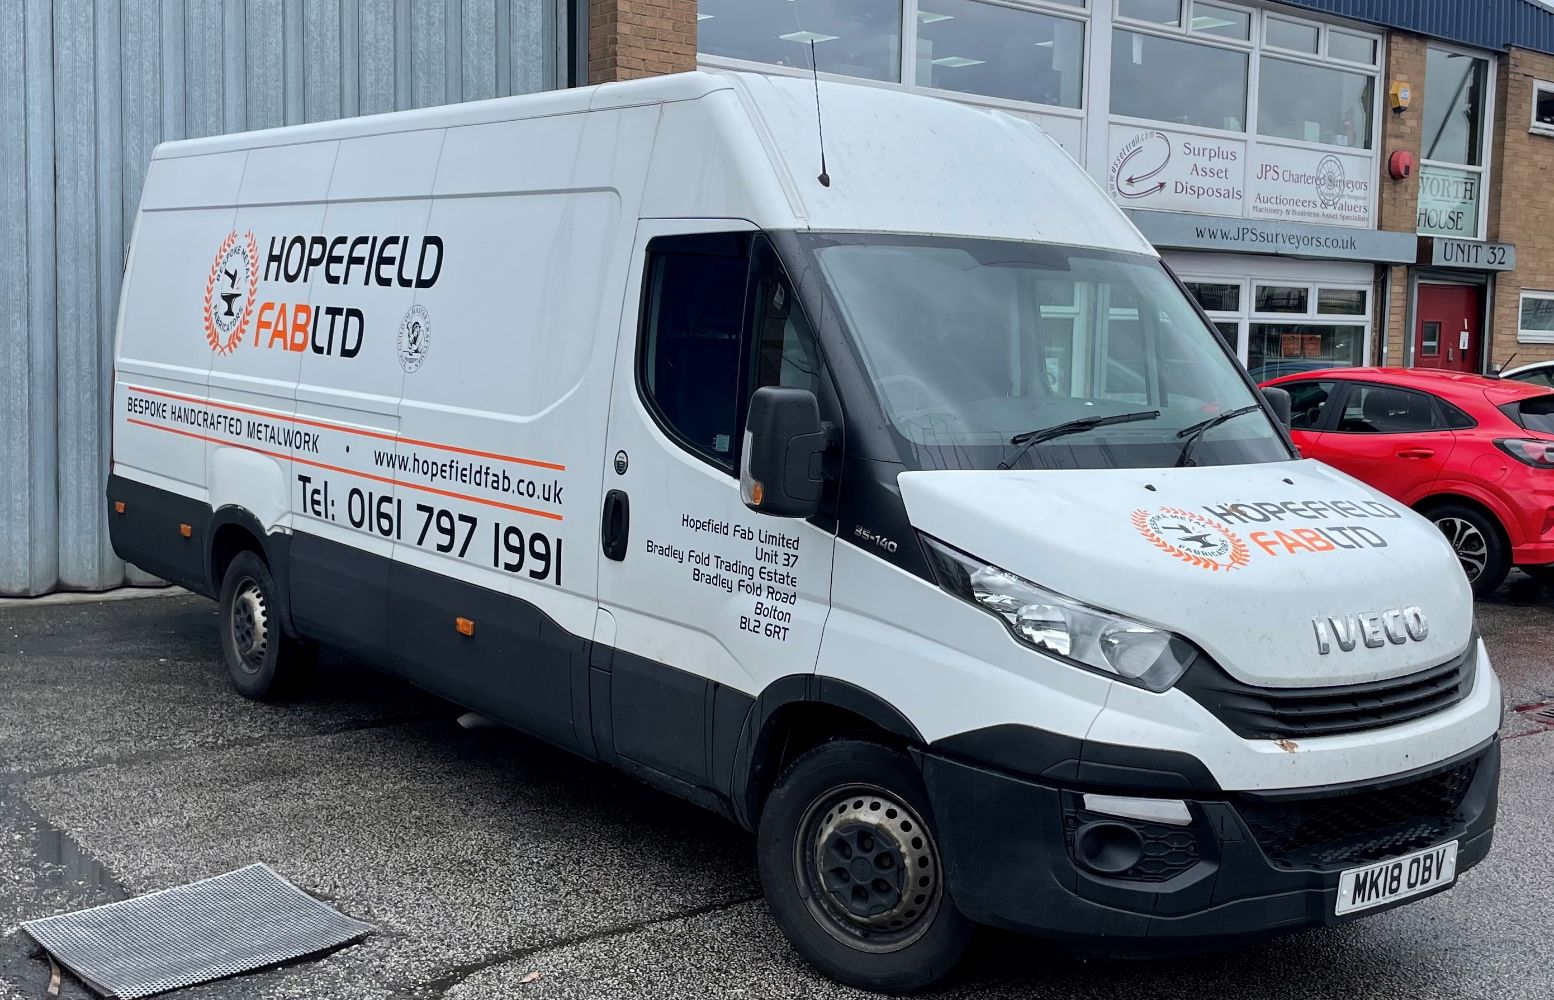 Vehicle Sale | IVECO Long Wheel Base Van 2018 Plate | Renault Master 2013 Plate | Sale Ends Monday 6th May 2022 | Viewing by Appointment Only